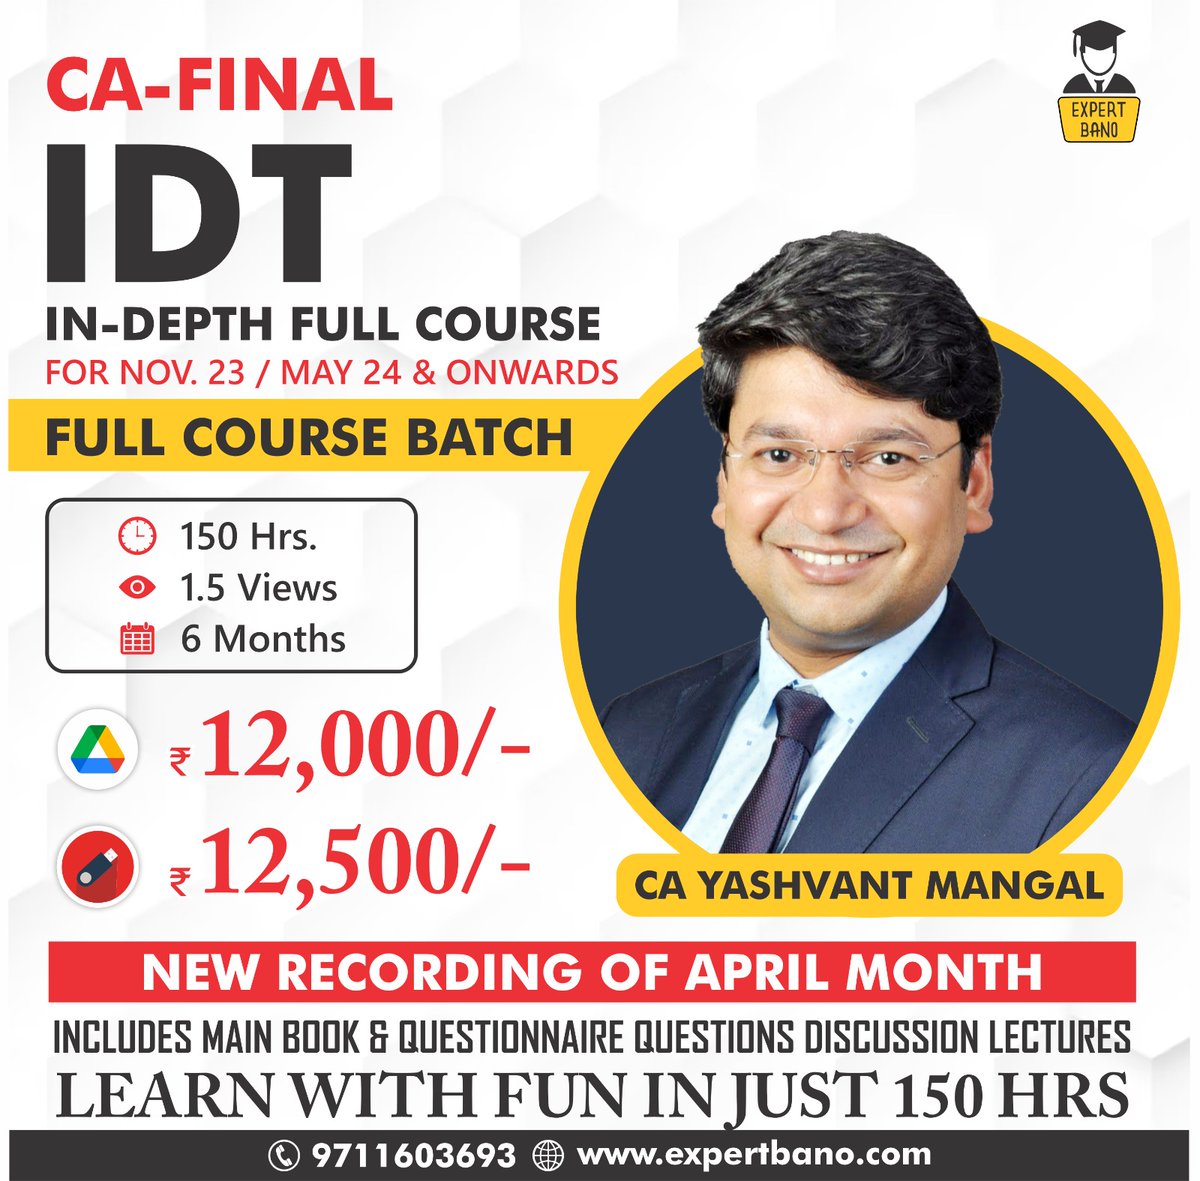 CA Final IDT Lectures by CA Yashvant Mangal
To buy, Visit: bit.ly/IDTbyYM
call at 9711603693 for inquiries.
#expertbano #cafinalidt #cayashvantmangal #caexams #CAclasses #caonlineclasses